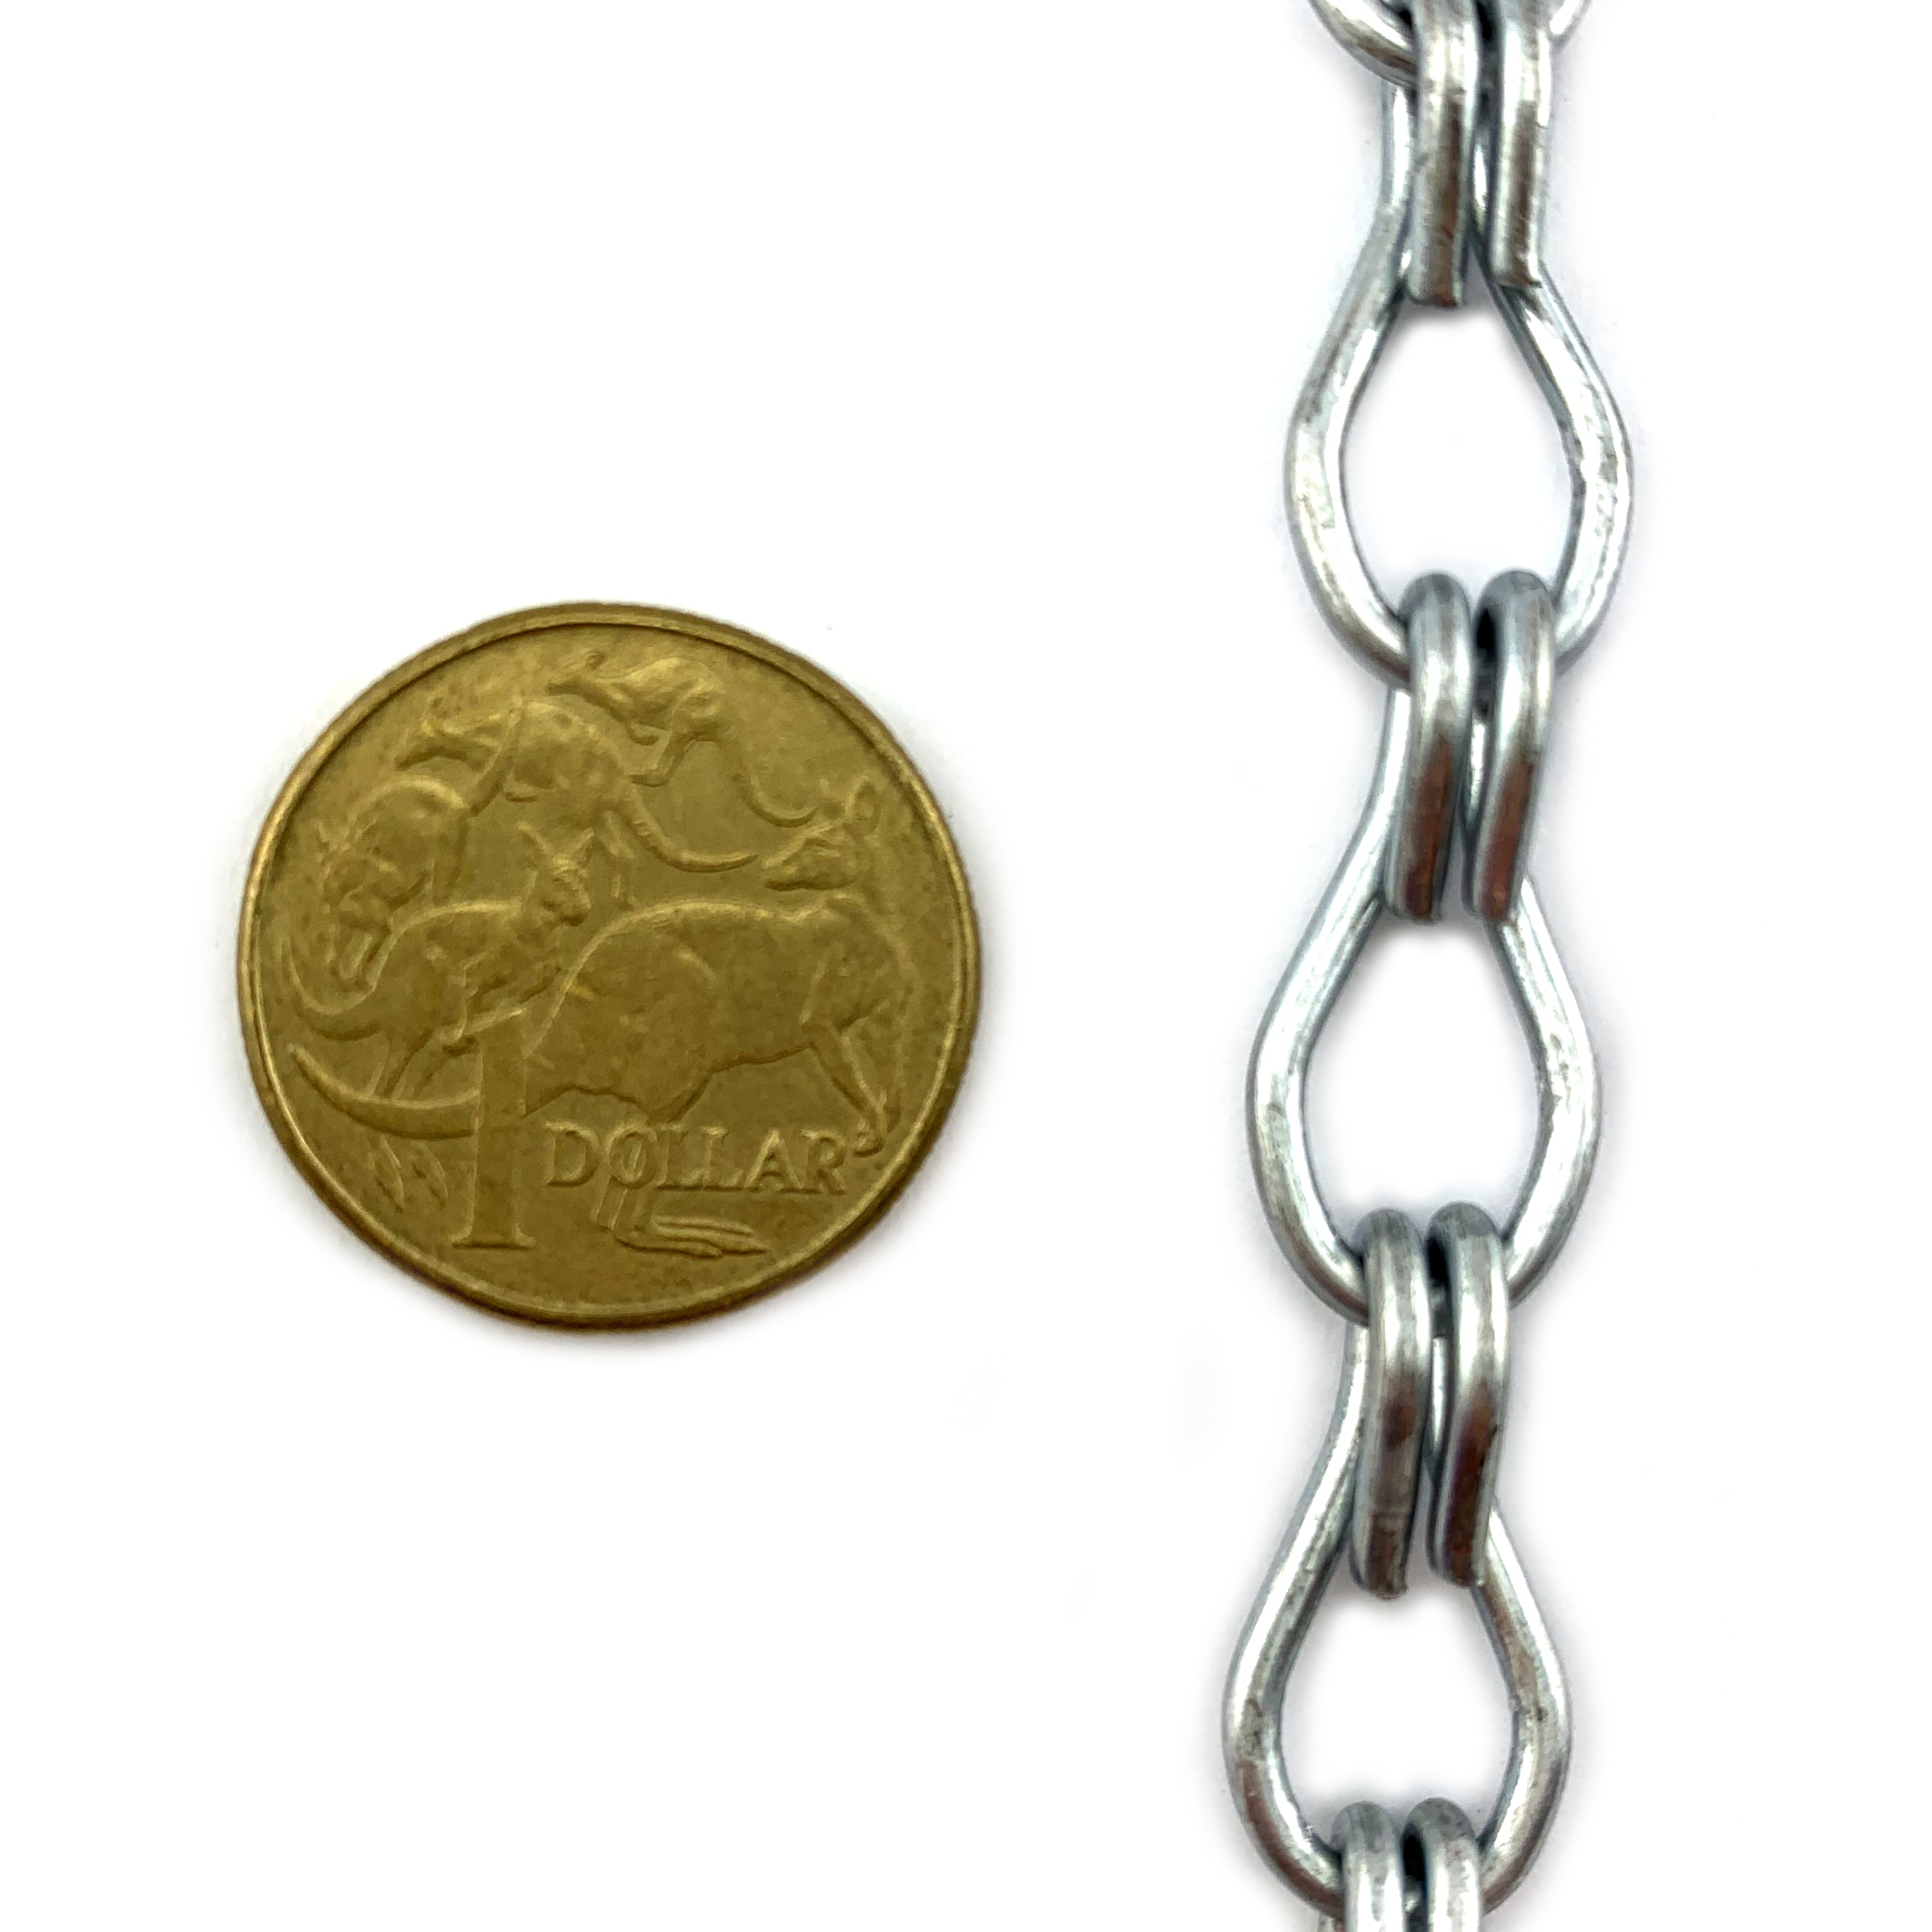 Double Jack Chain Galvanised size 2mm. Order by the metre. Australian made.